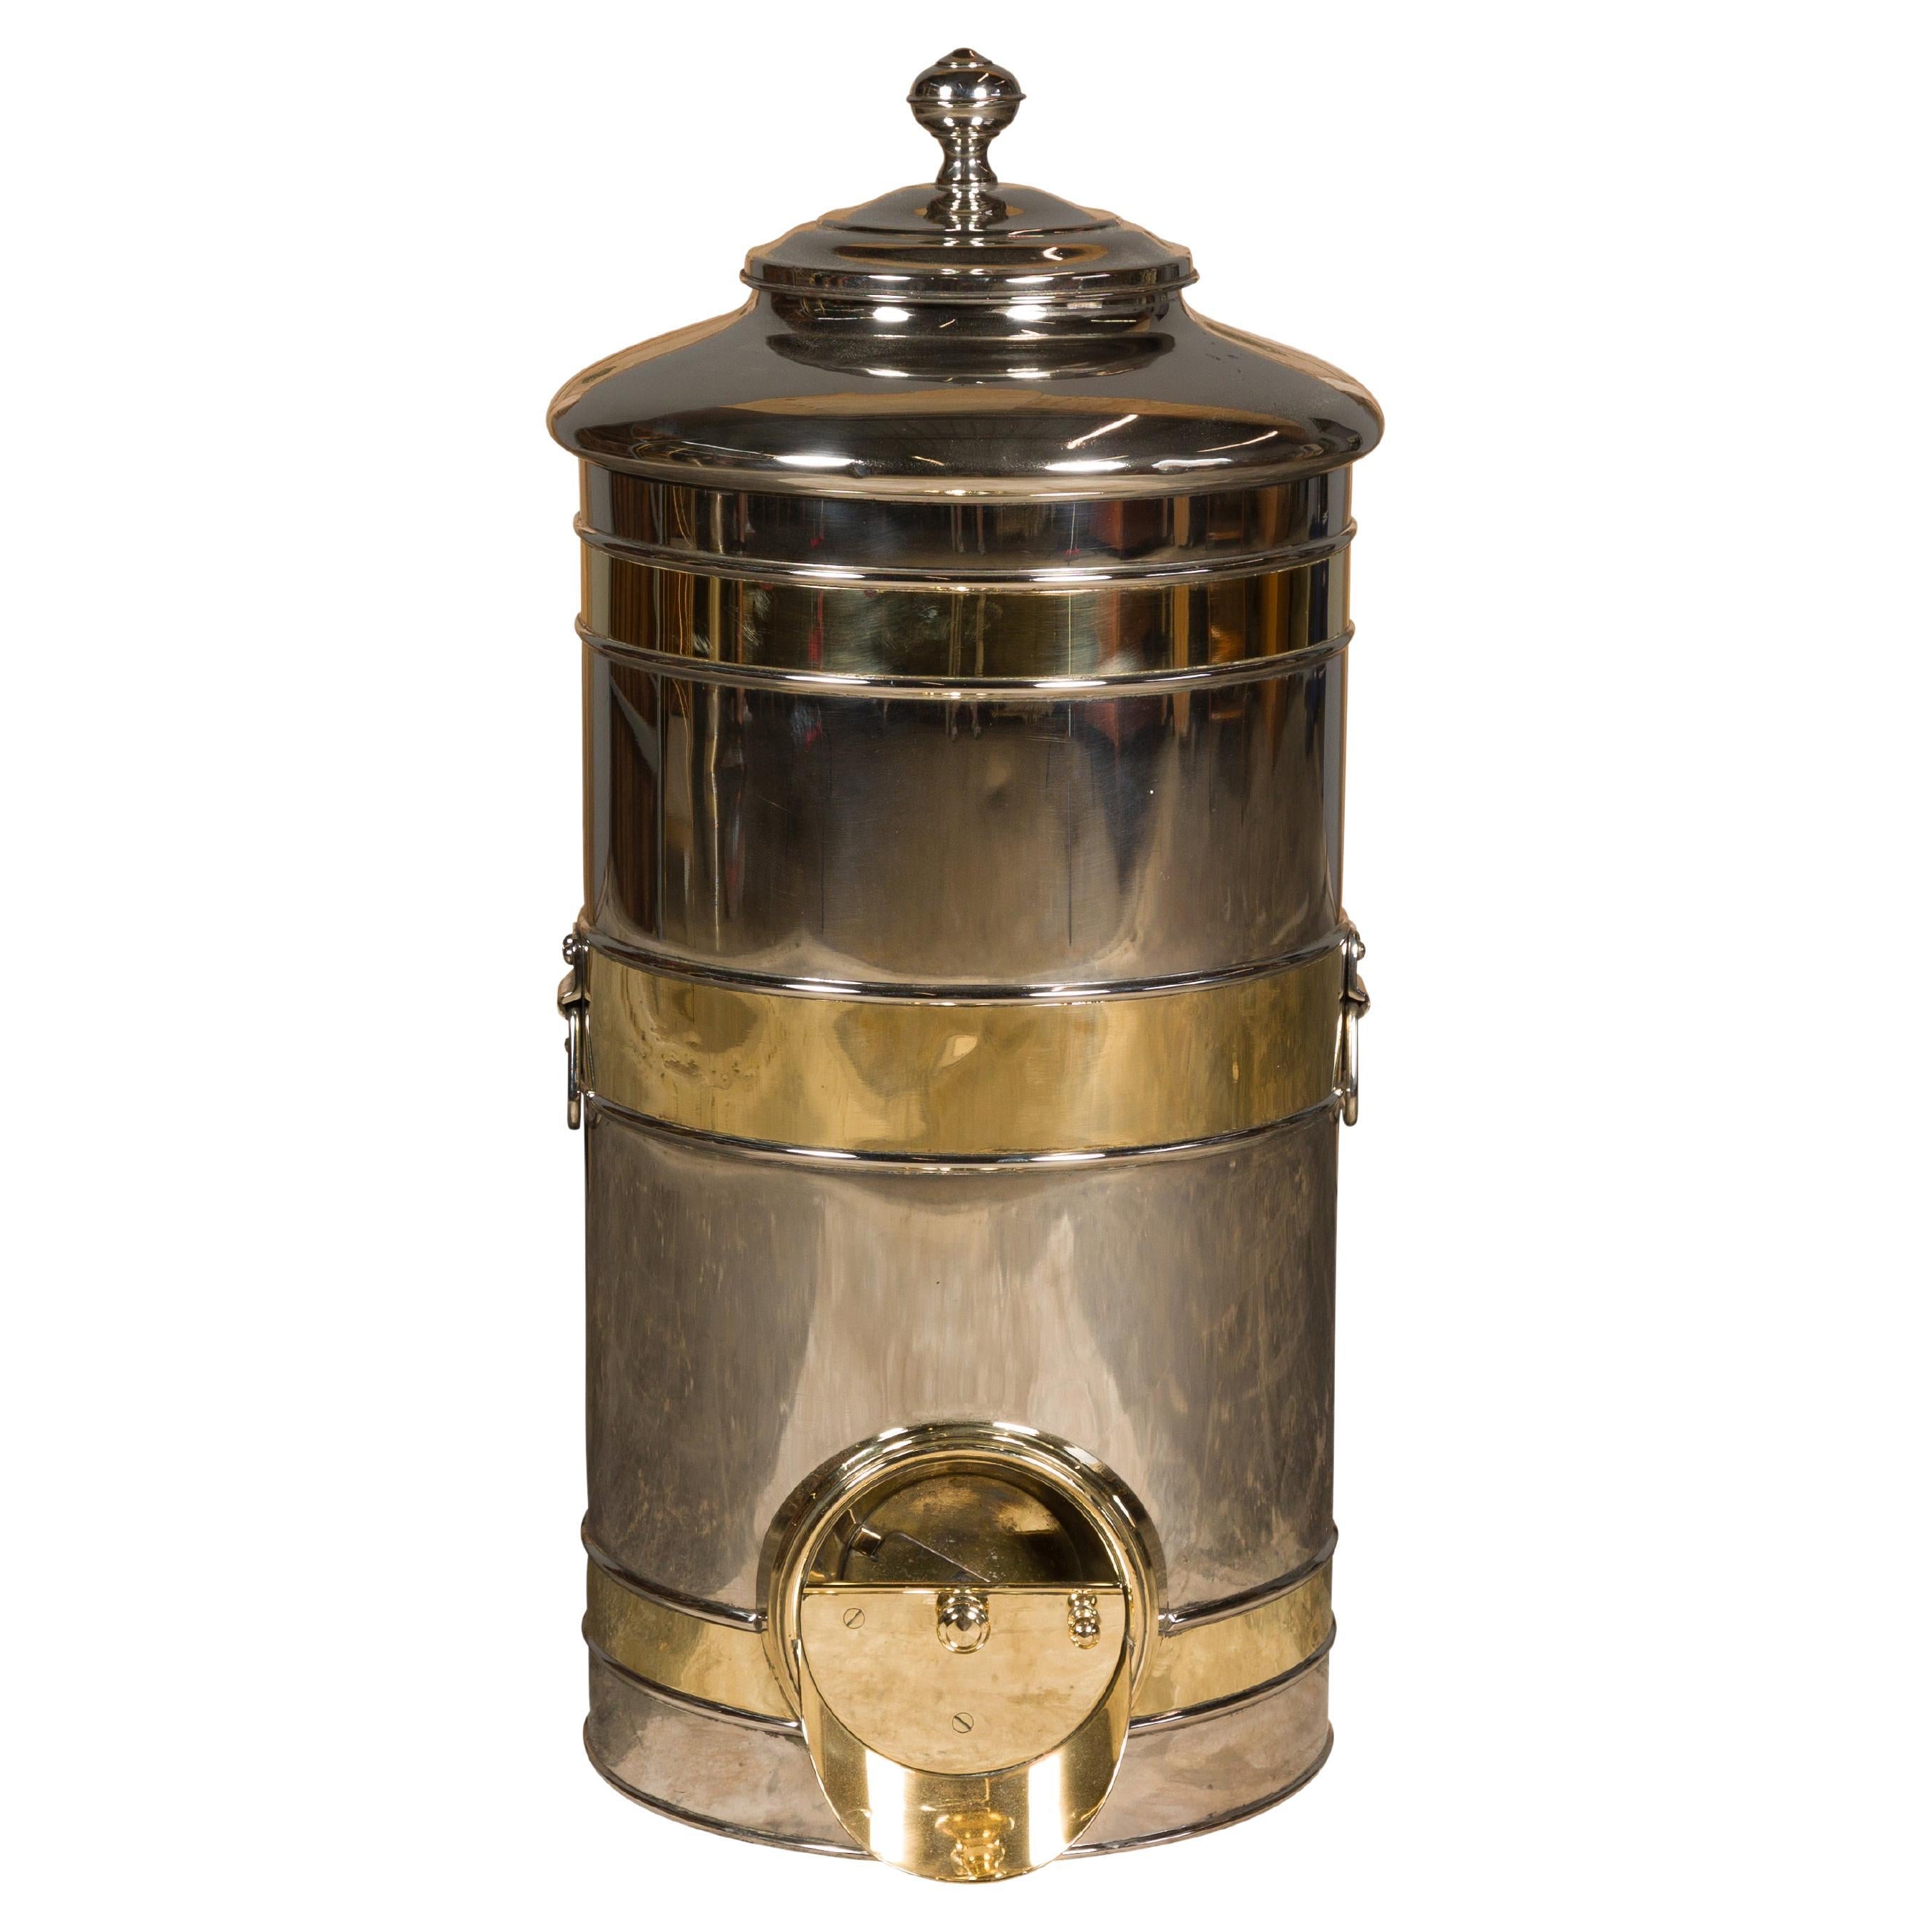 French Turn of the Century Steel and Brass Coffee Bean Dispenser, circa 1900